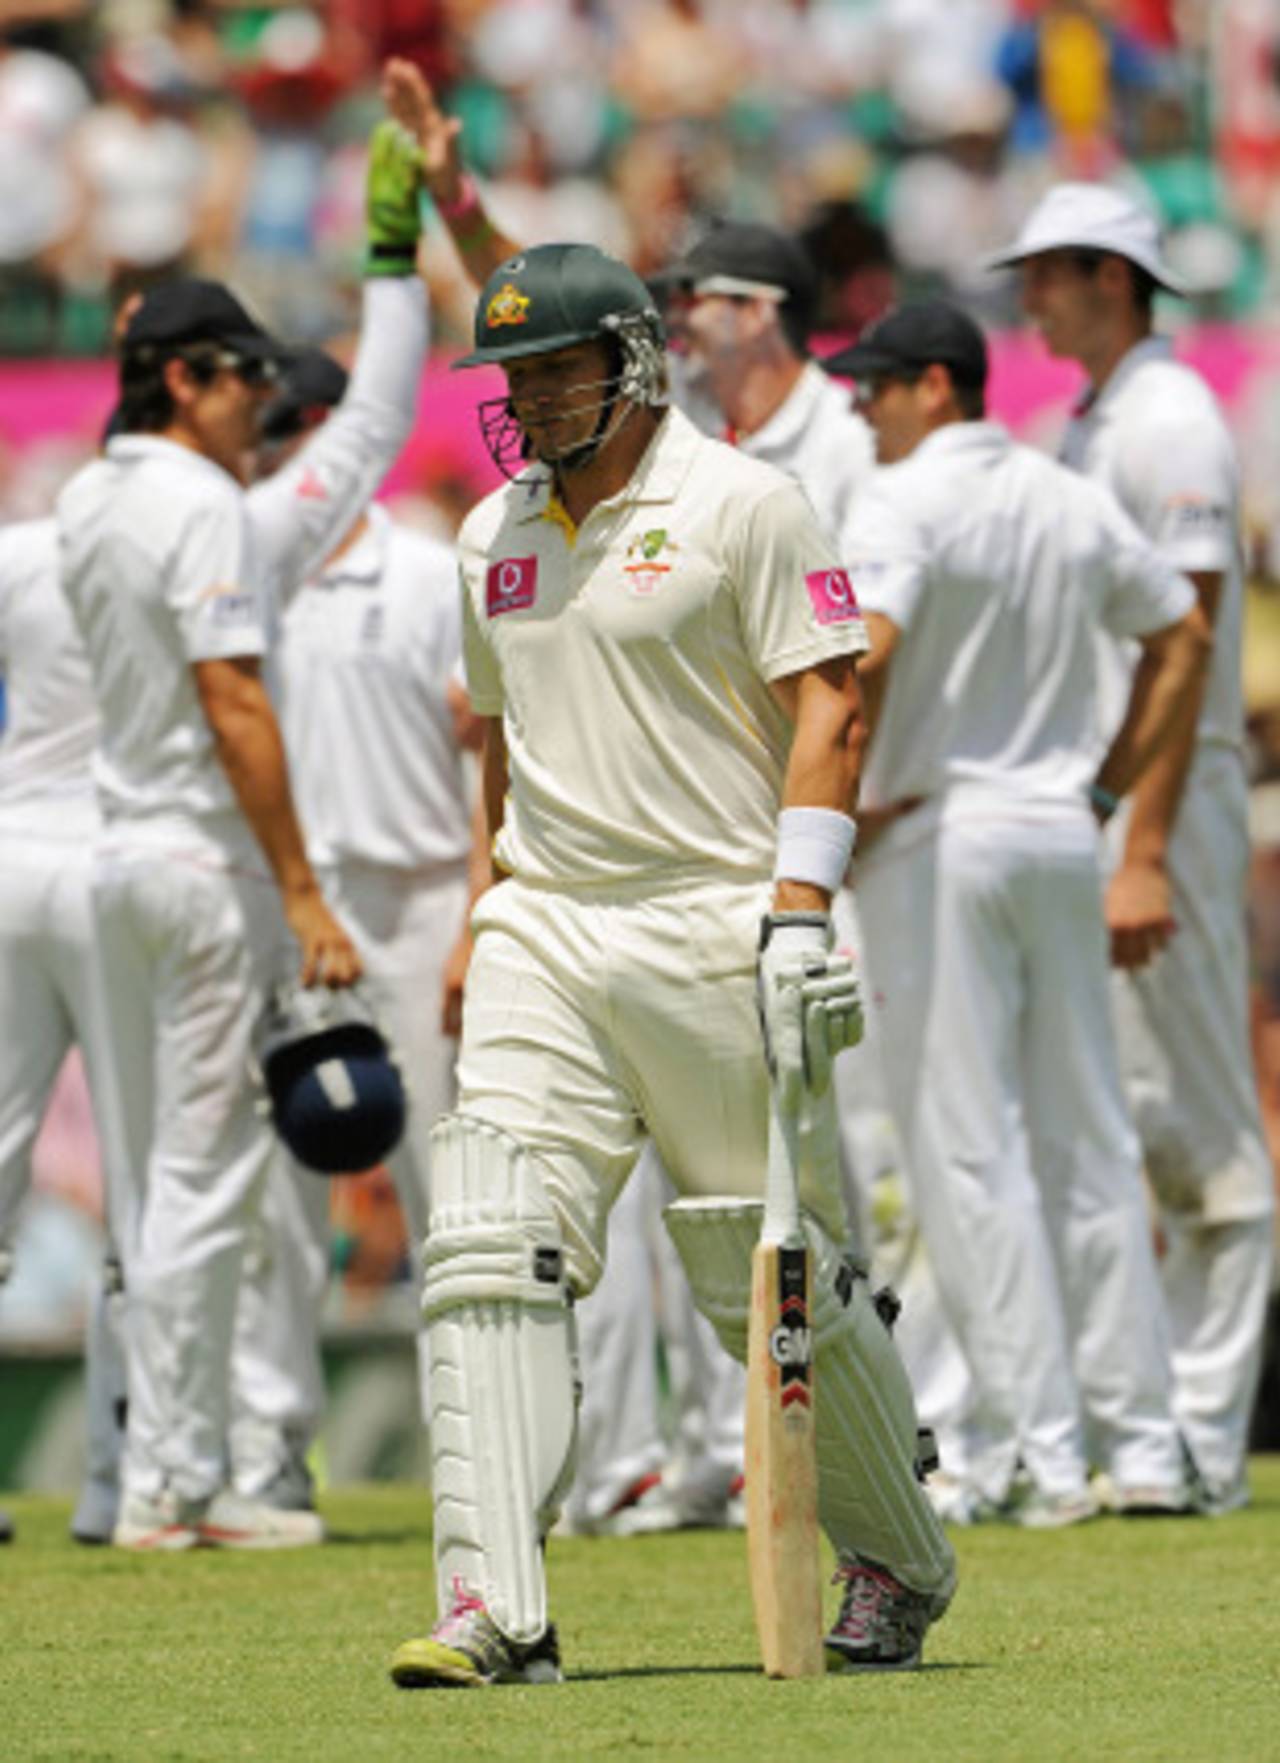 Shane Watson trudges off after yet another mix-up led to his run out dismissal&nbsp;&nbsp;&bull;&nbsp;&nbsp;AFP